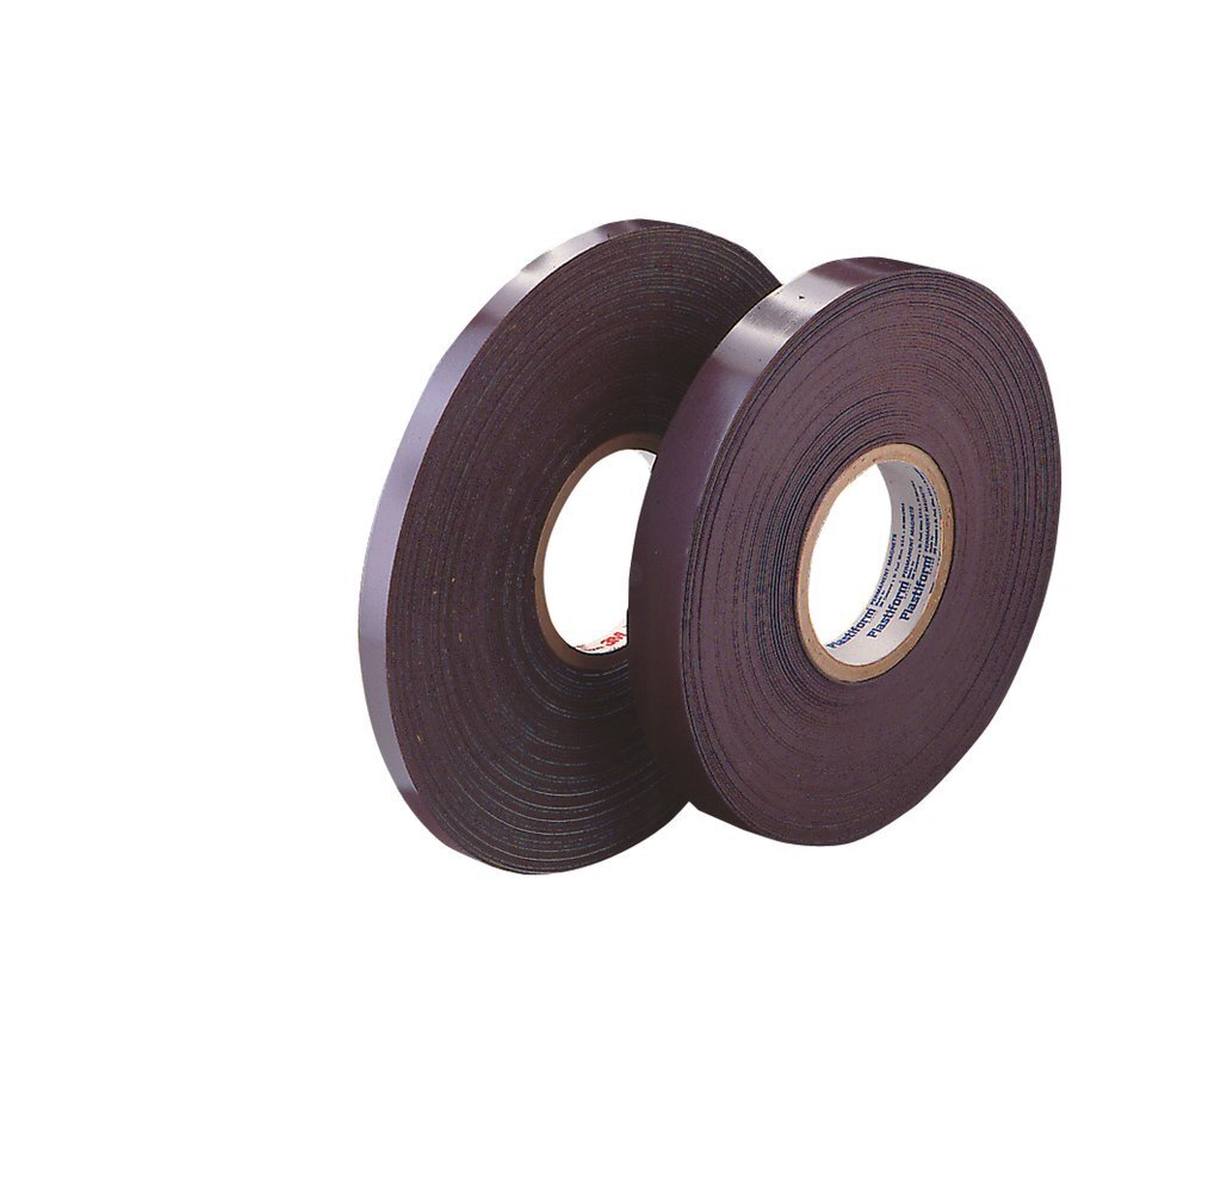 3M 1317 Magnetic adhesive tape, brown, 19 mm x 30.5 m, 1.5 mm